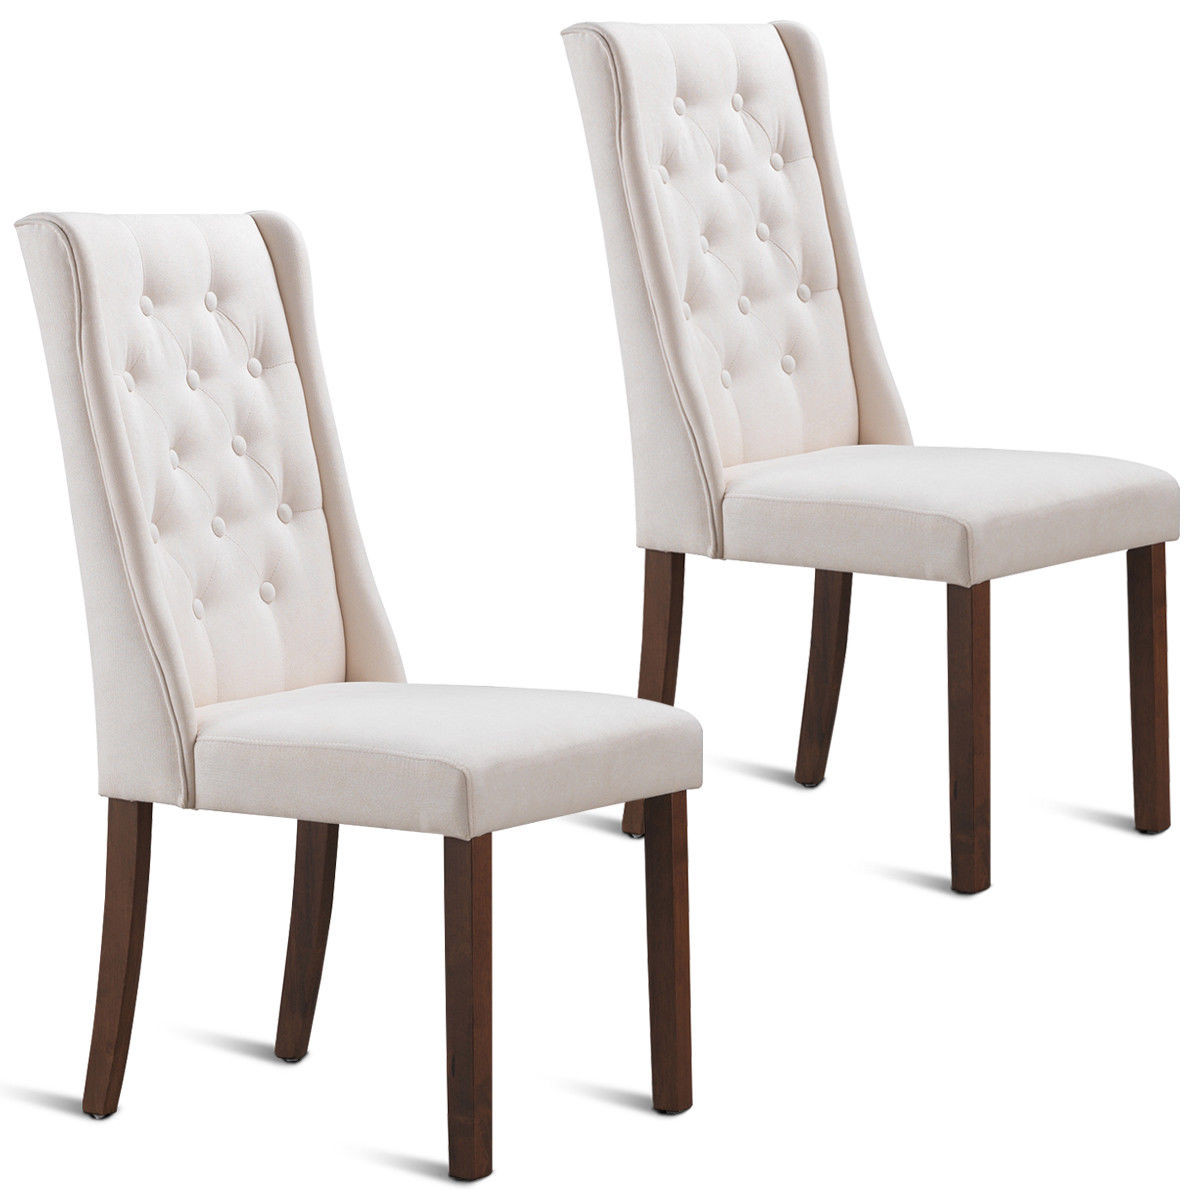 Armless Living Room Chairs
 Gymax Set of 2 Fabric Dining Chairs Armless Tufted Accent